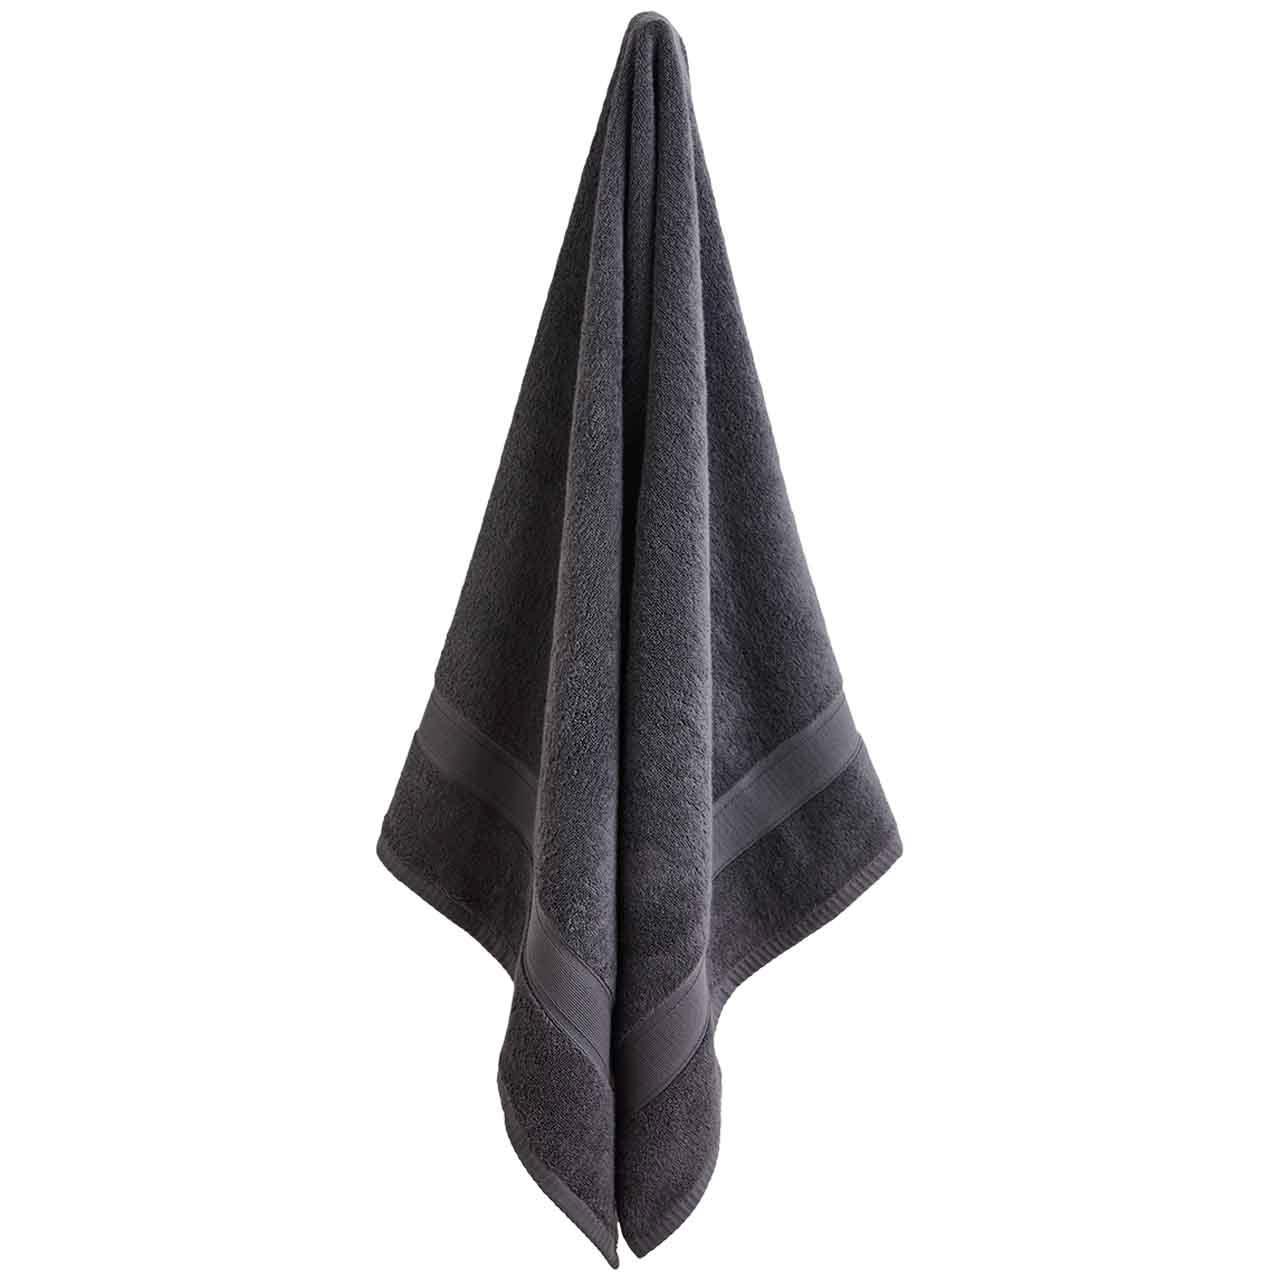 M&S Super Soft Pure Cotton Antibacterial Hand Towel, Charcoal